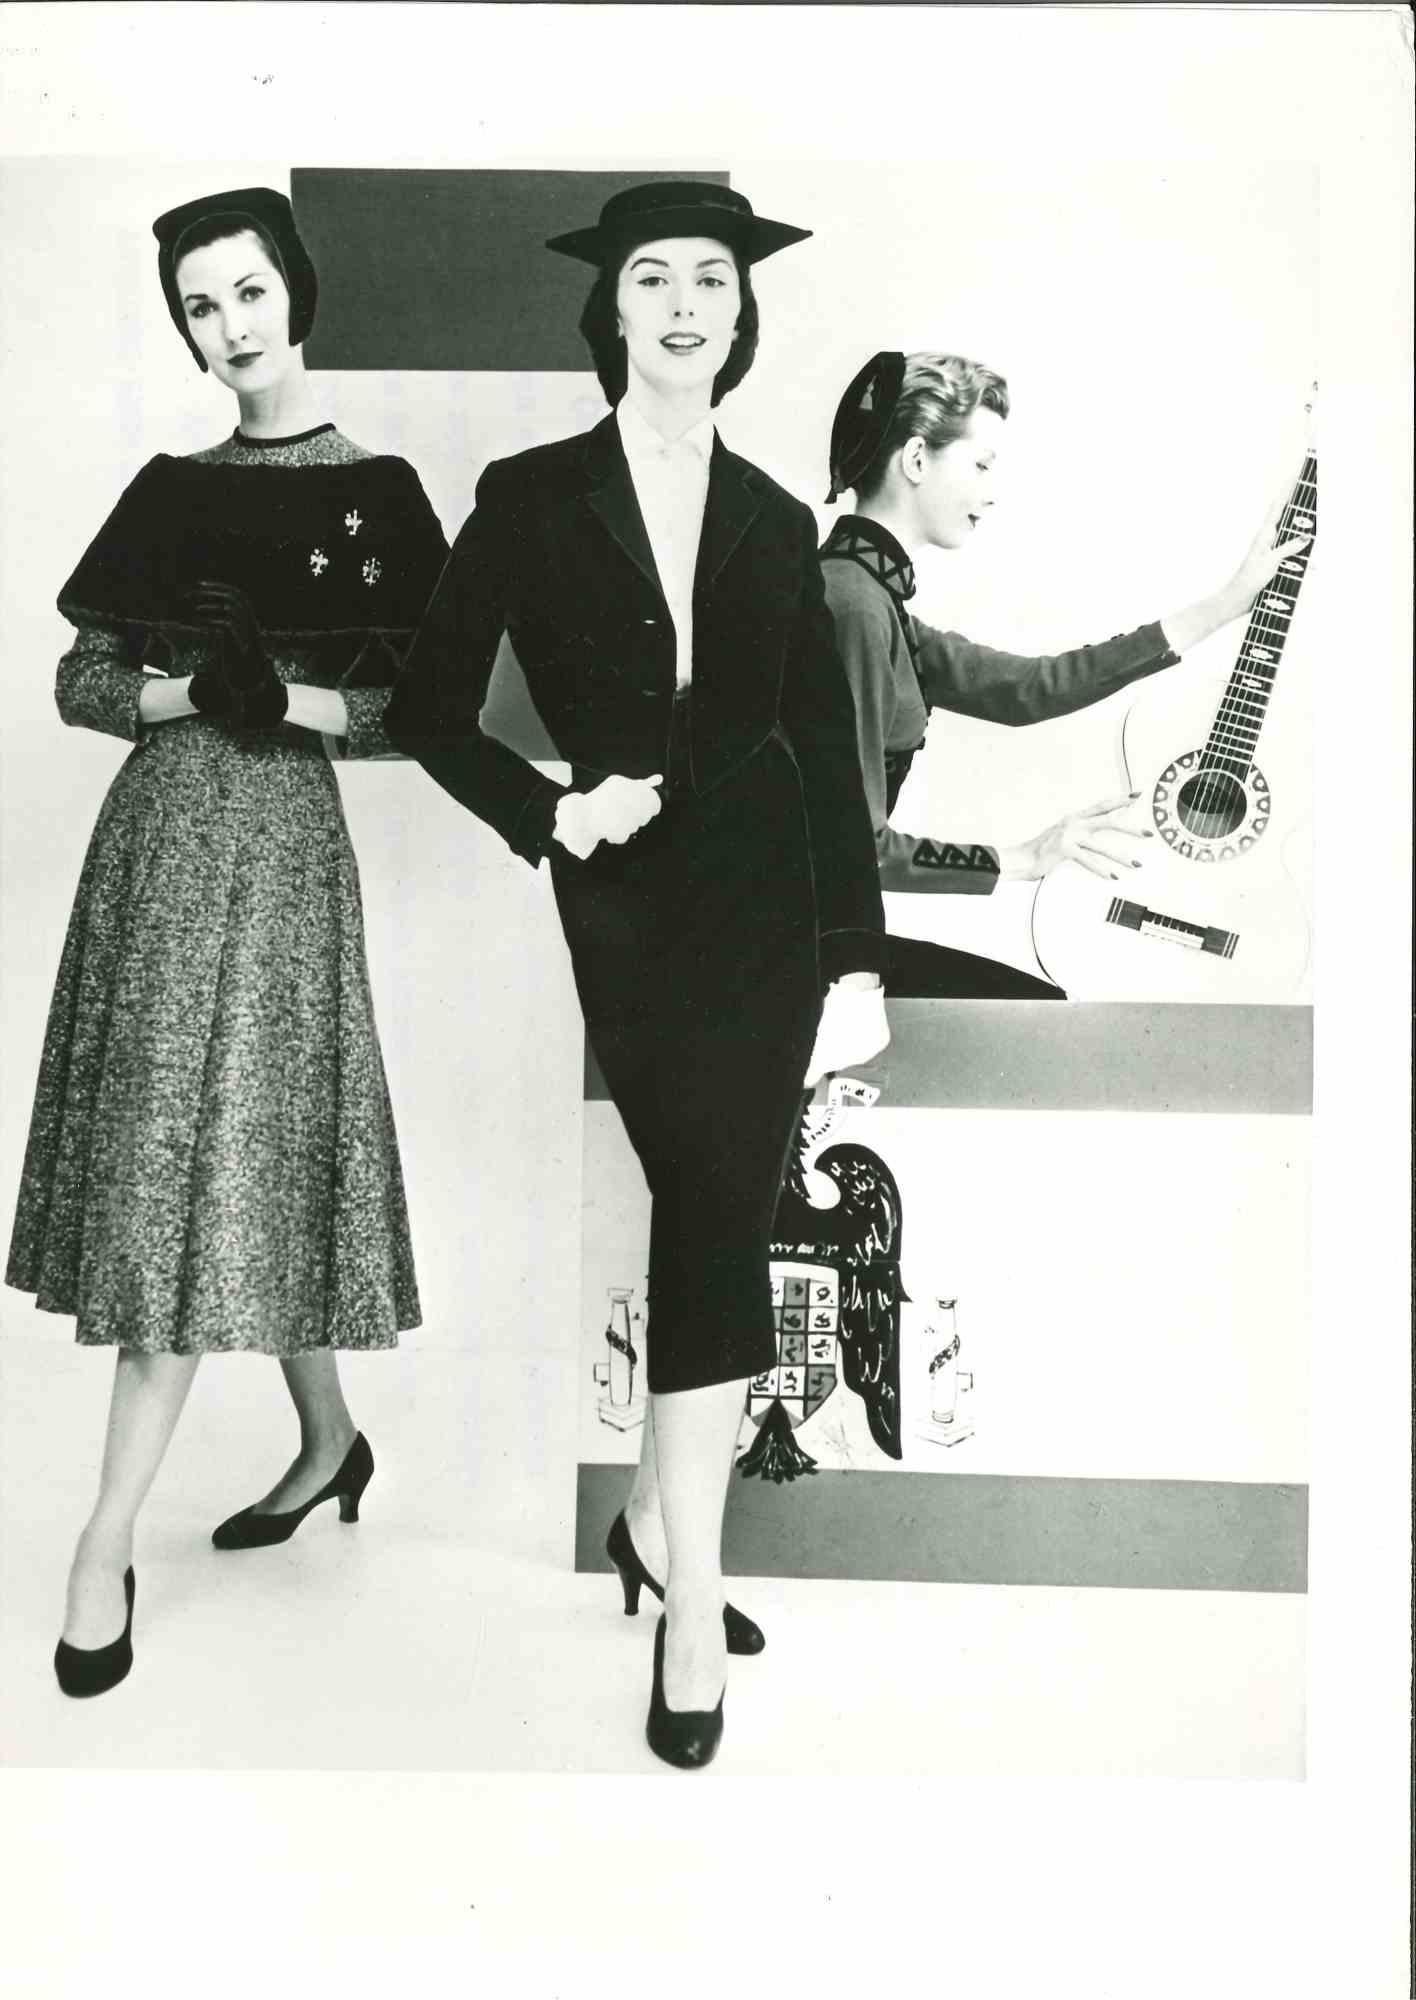 Unknown Figurative Photograph - Foreign Fashion in The U.S. - Vintage Photograph - Mid 20th Century